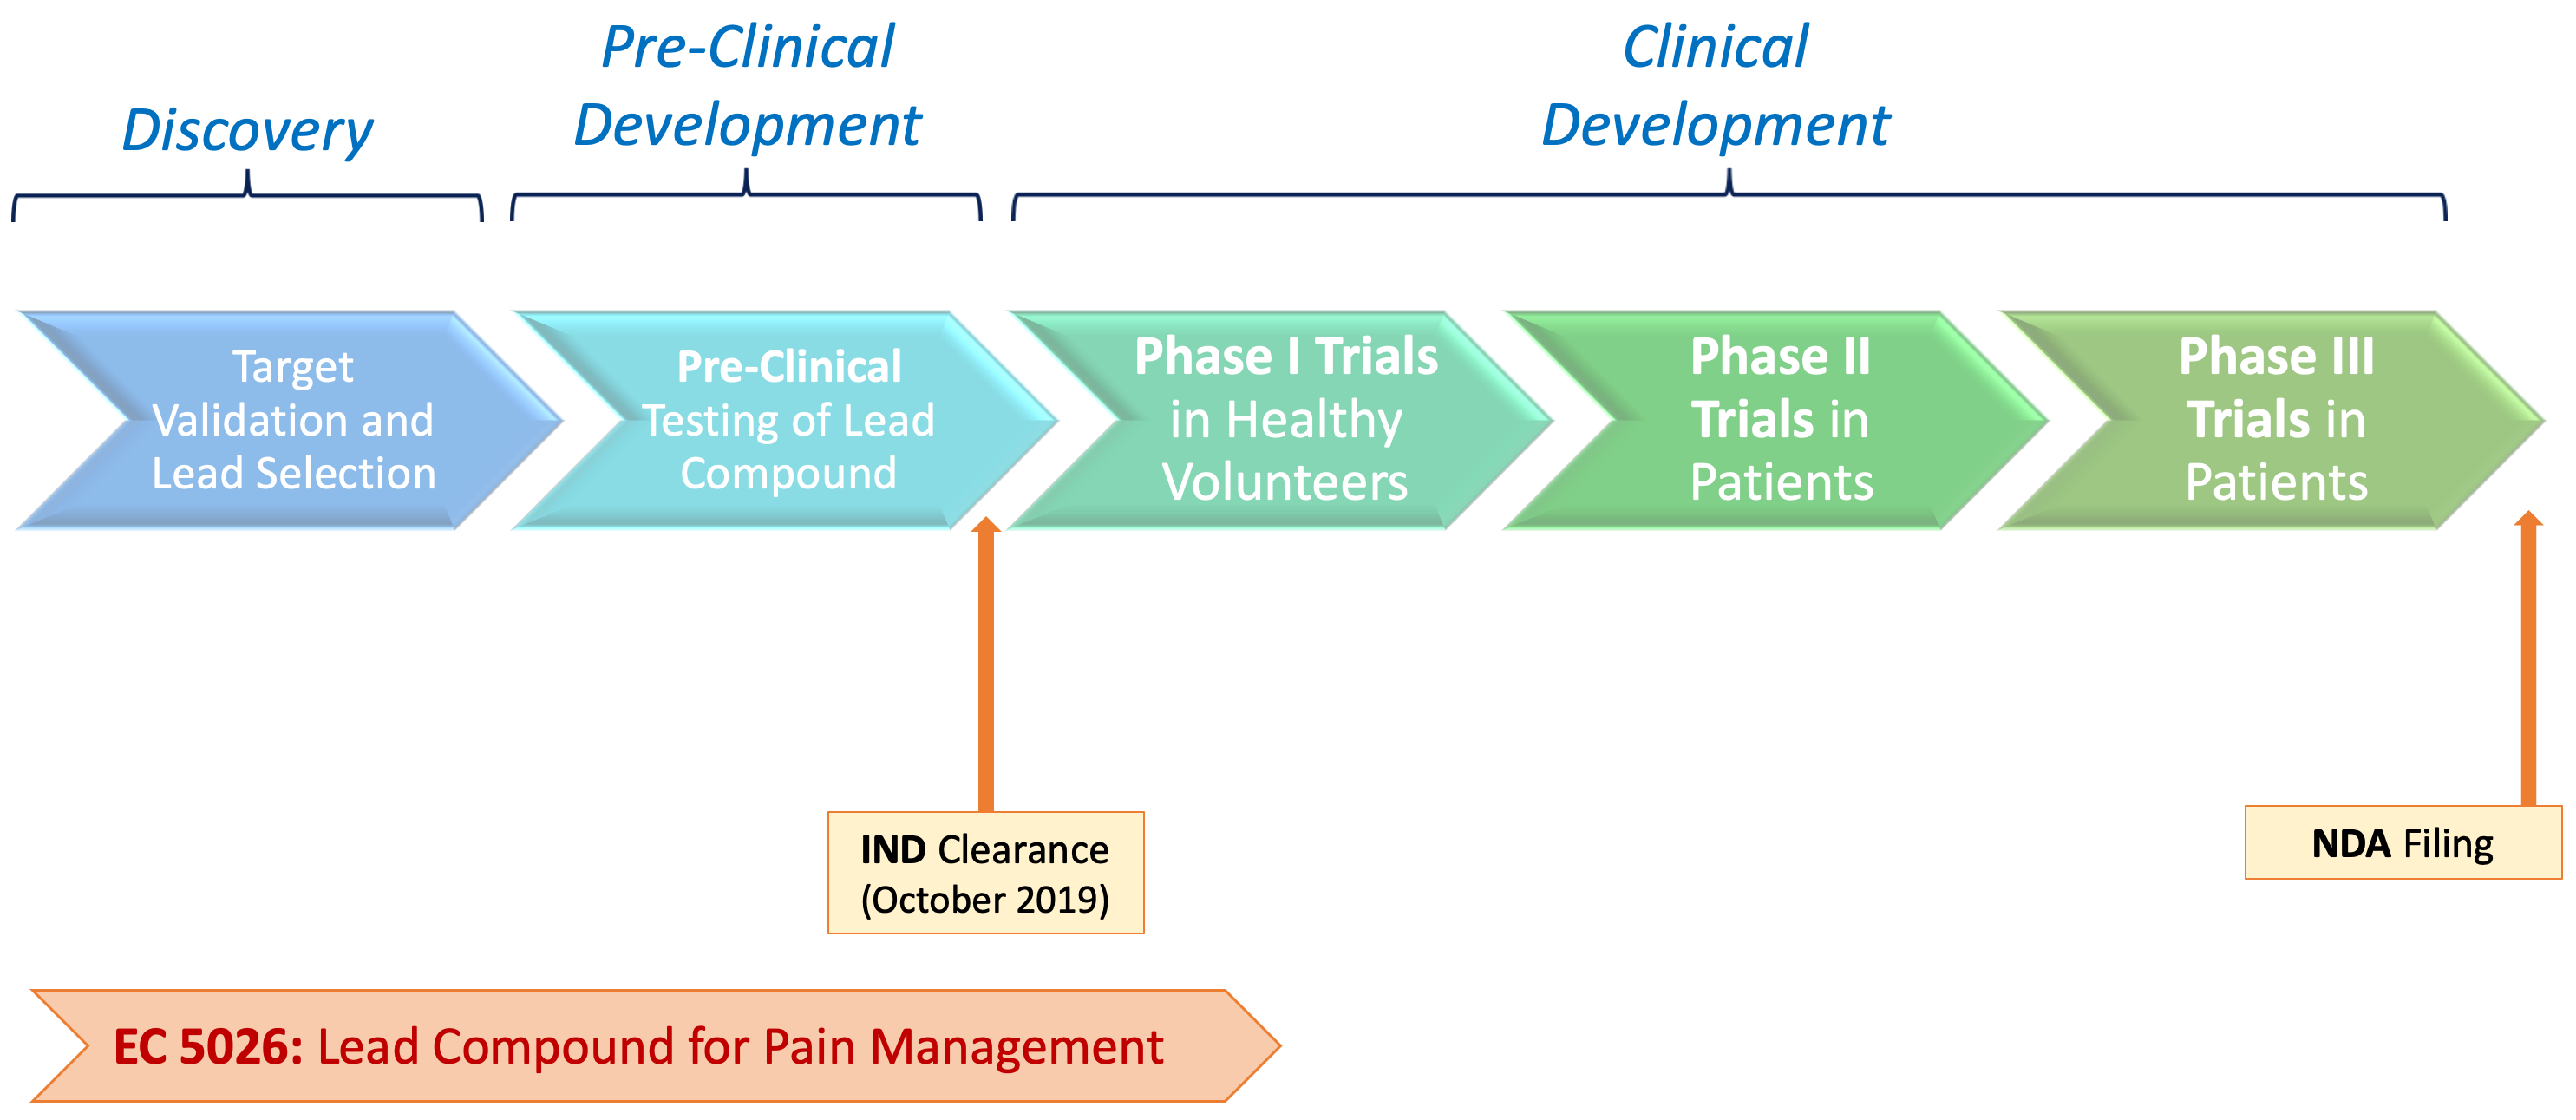 Visual graphic showing the development pipeline for EicOsis drug EC5026 as of December 2019.